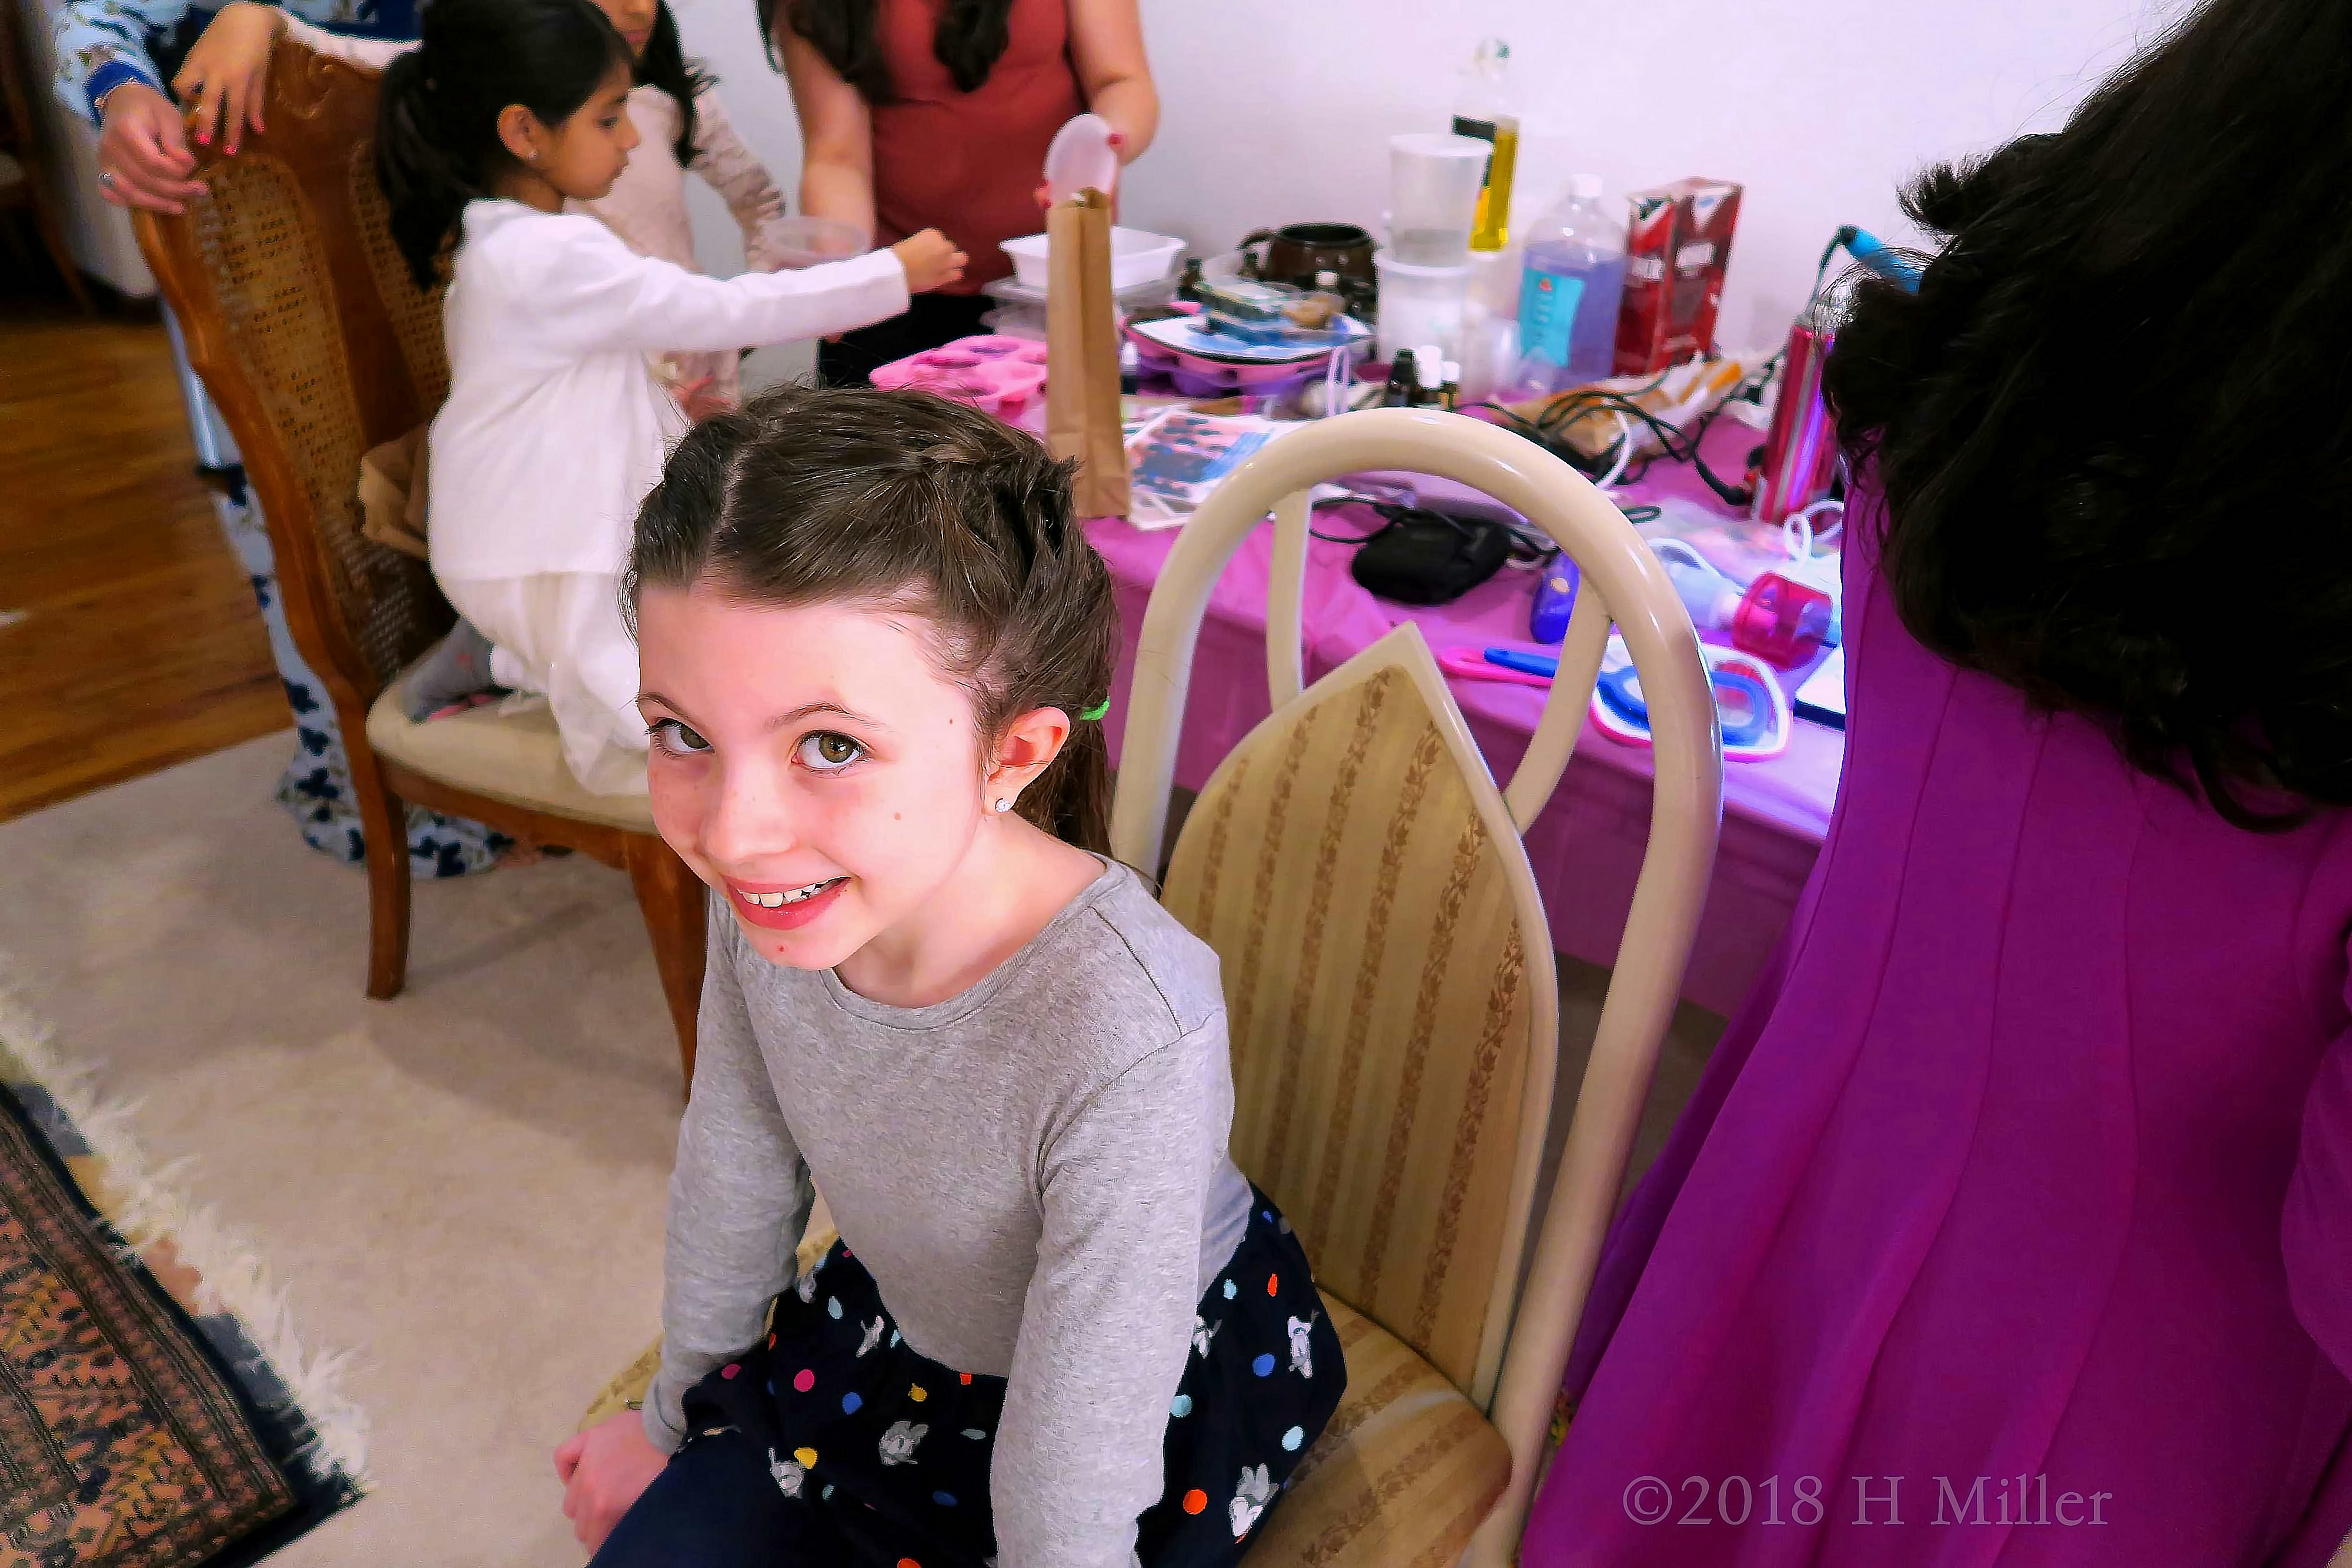 Fantastic Hairstyle For Kids! Waiting For Her Friends To Make The Kids Crafts!